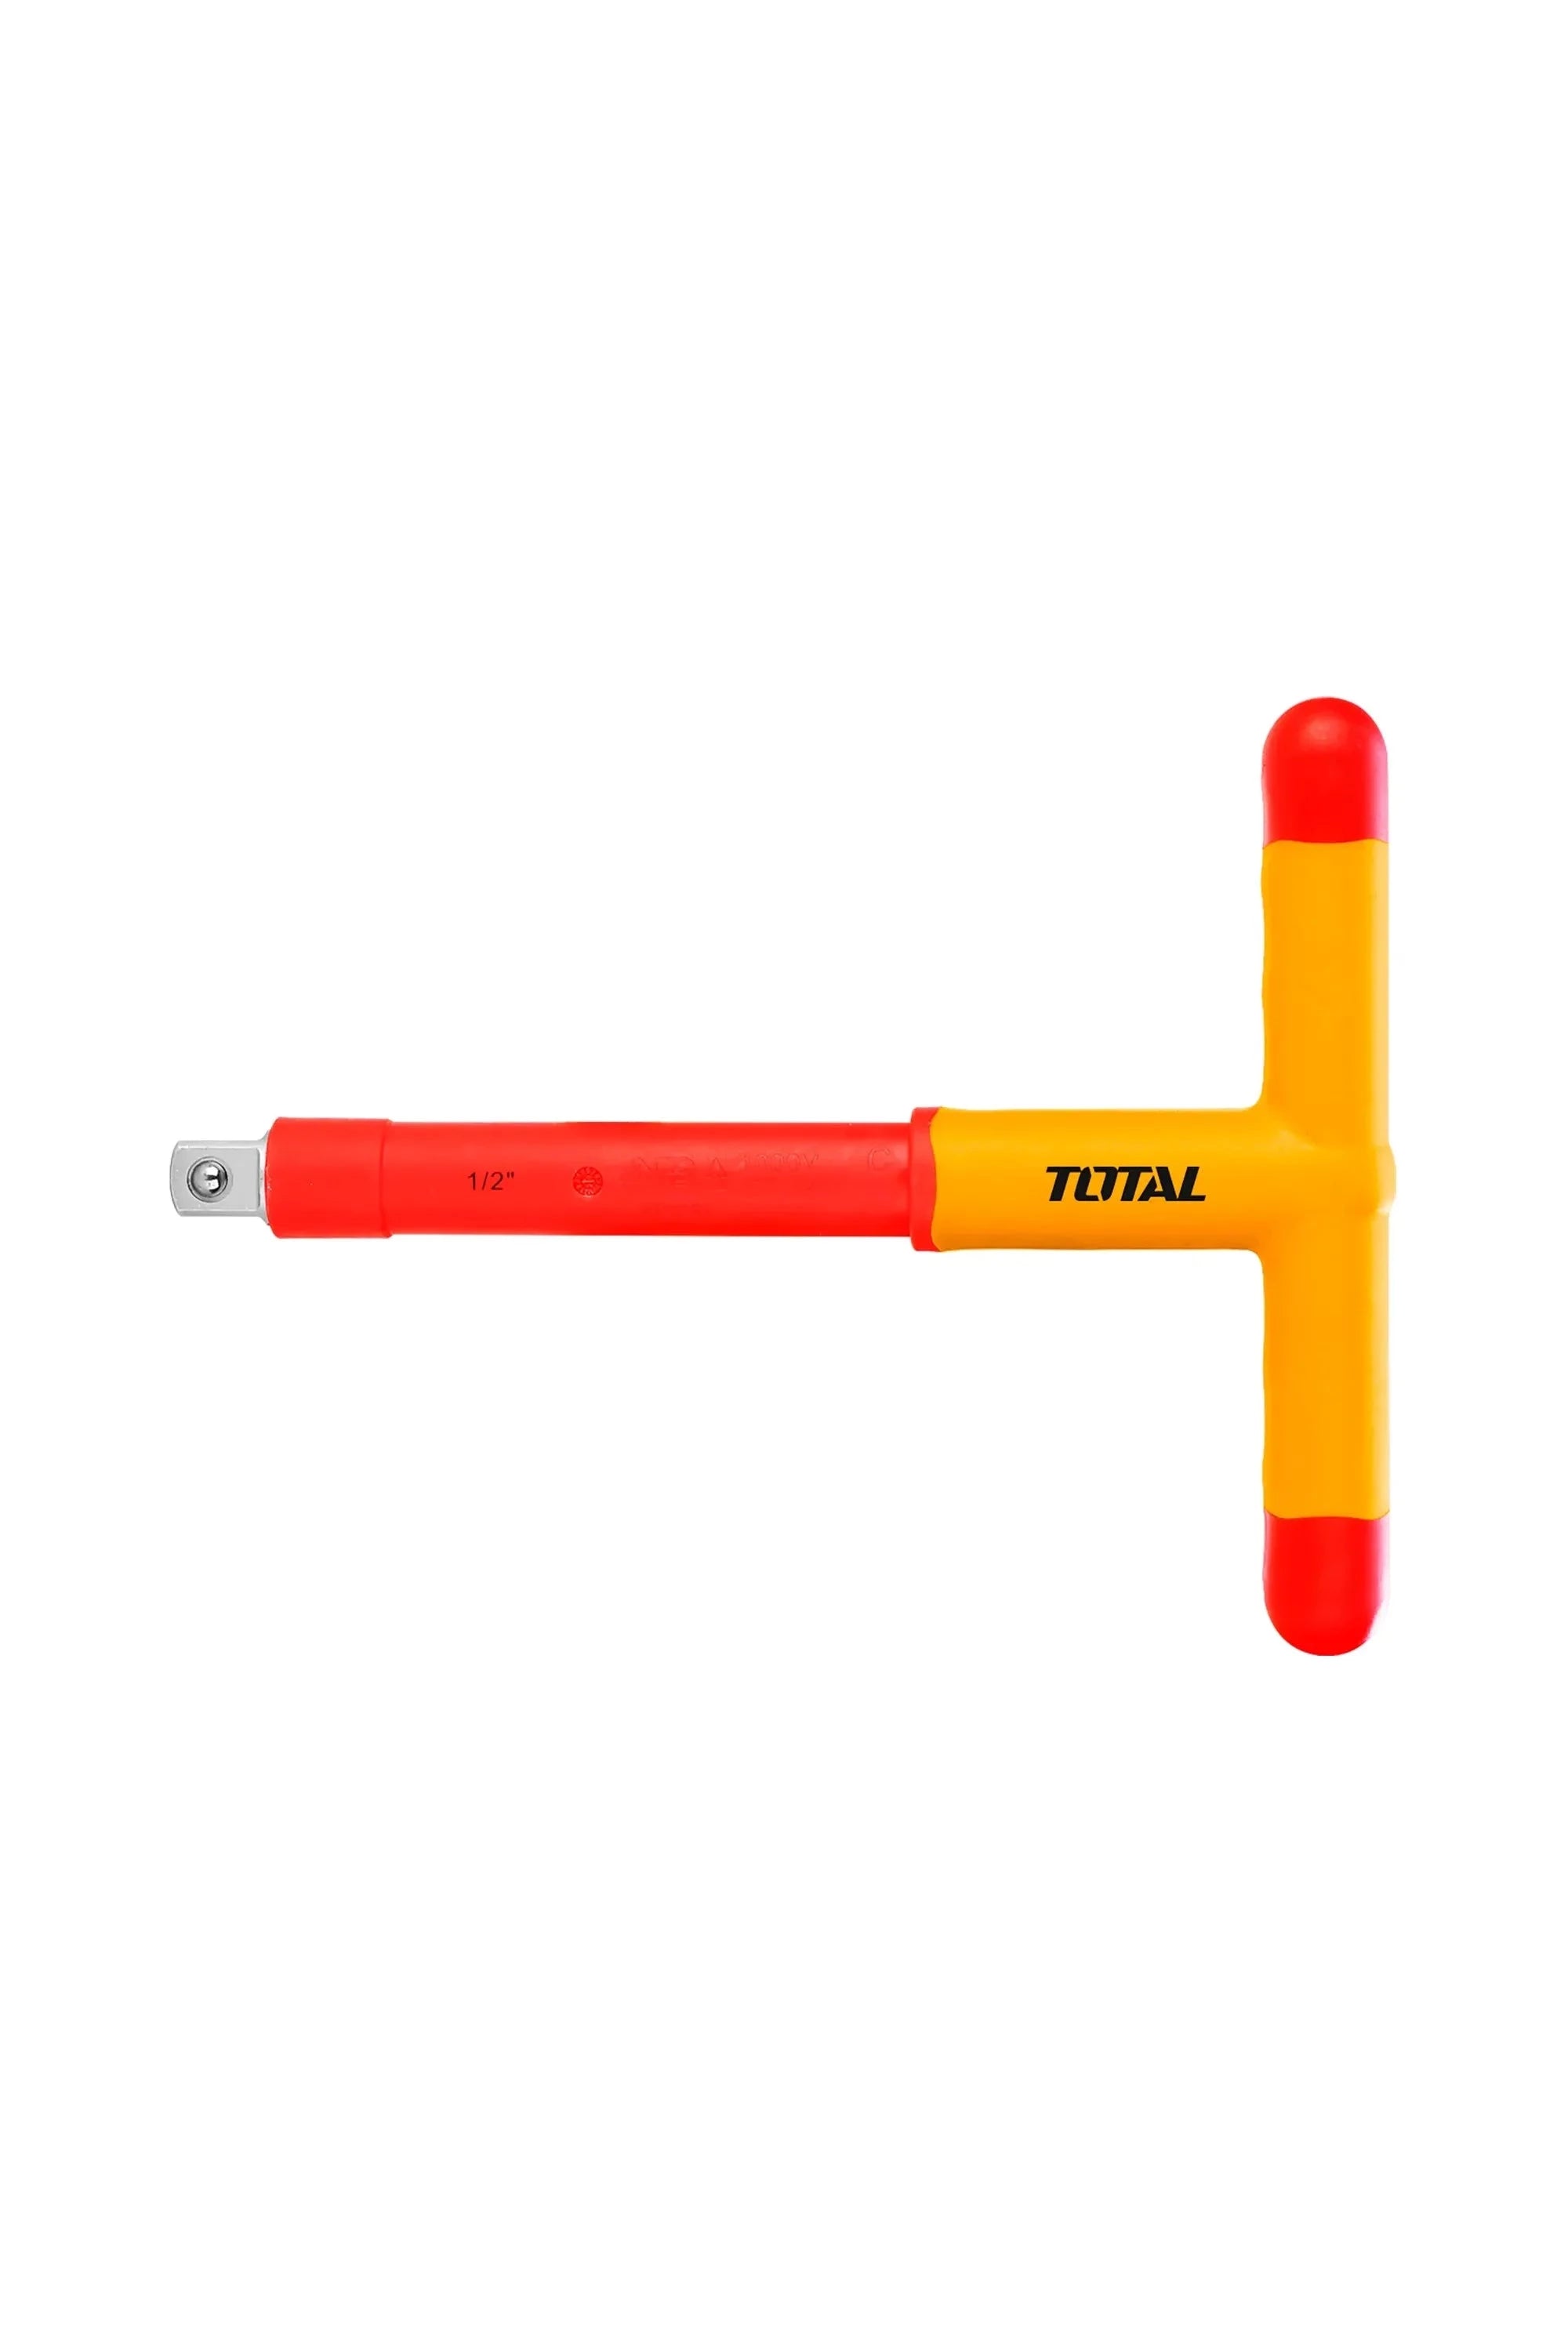 TOTAL 1/2" INSULATED T-HANDLE WRENCH - Elite Renewable Solutions